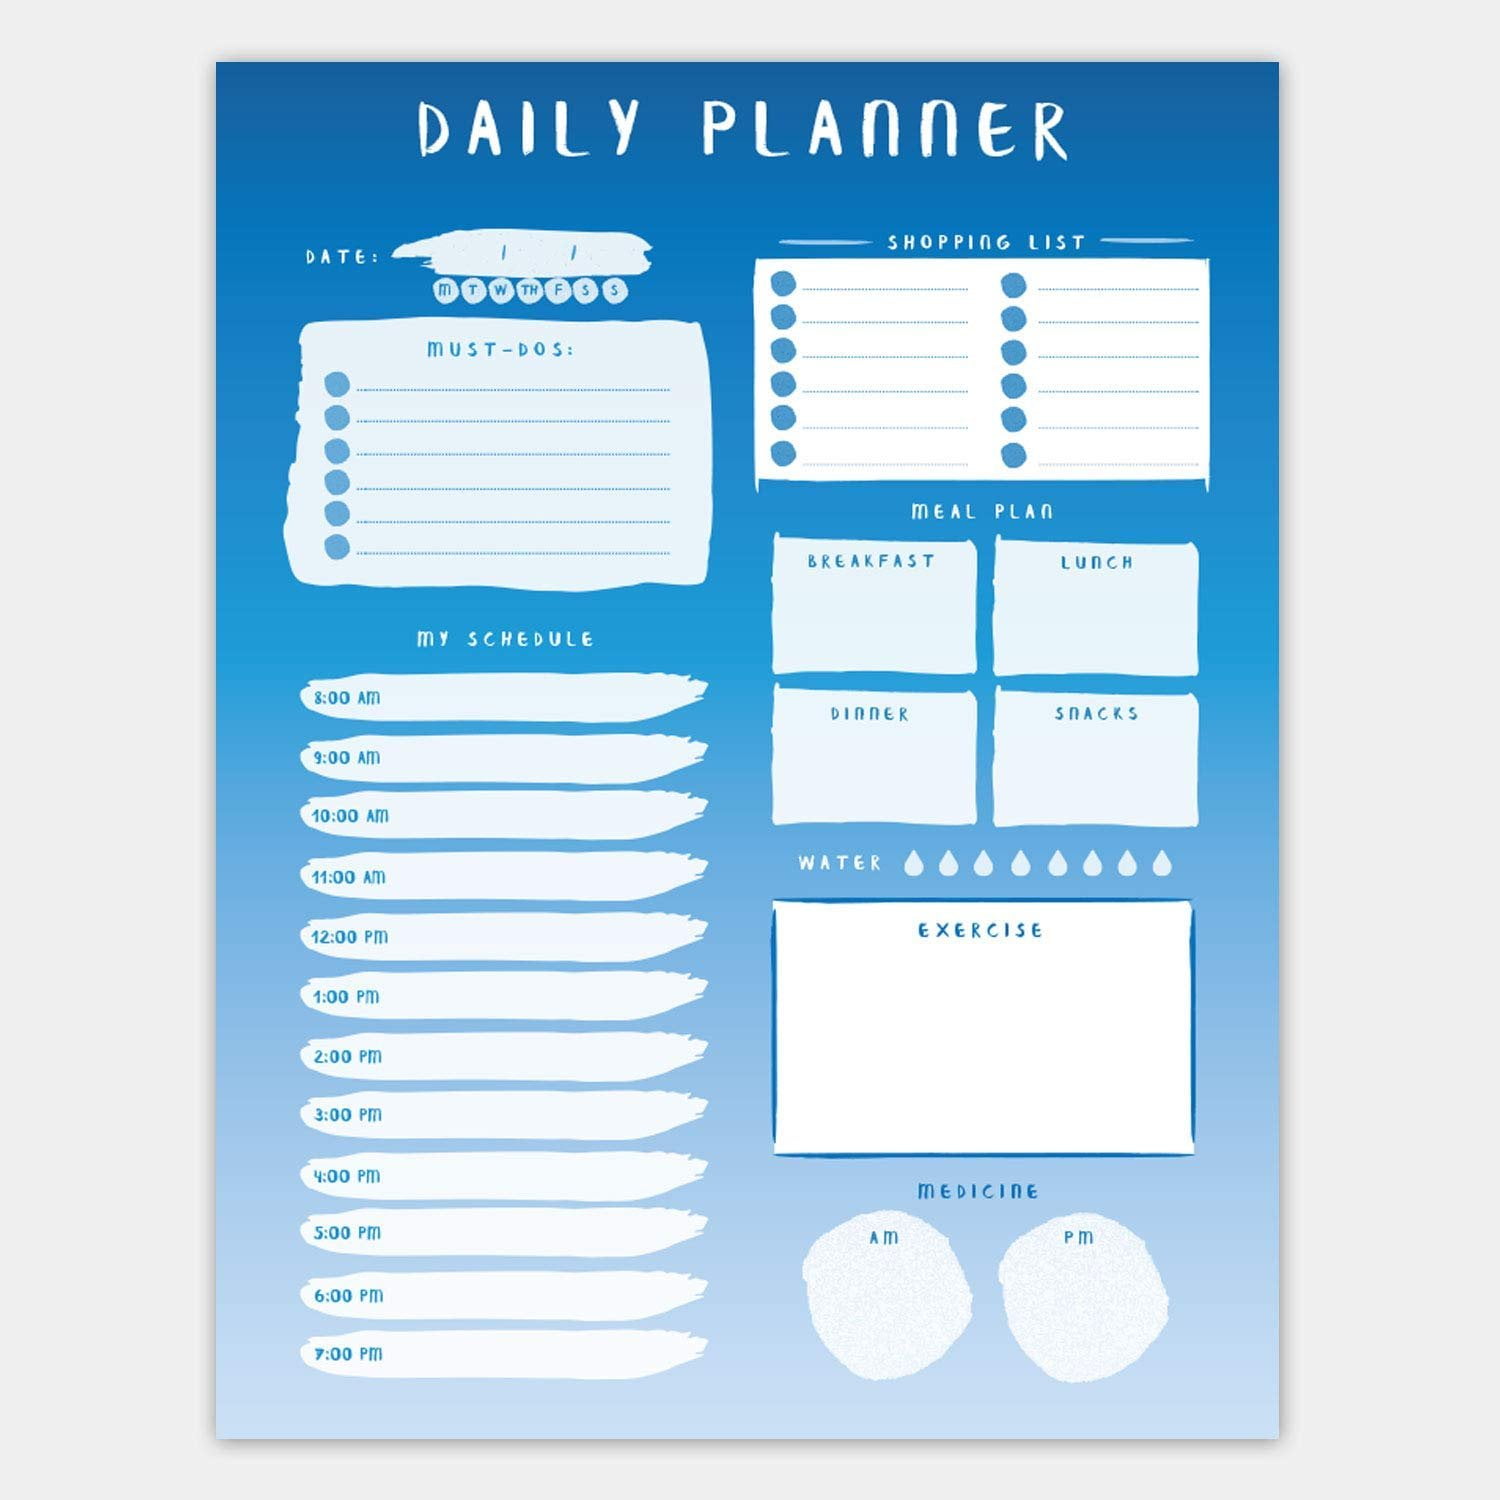 Daily Planner Goal Planner PDF 8.5 x 11 Inch Printable Planner 29 Pages Monthly Calendar Medical Information Meal Planner